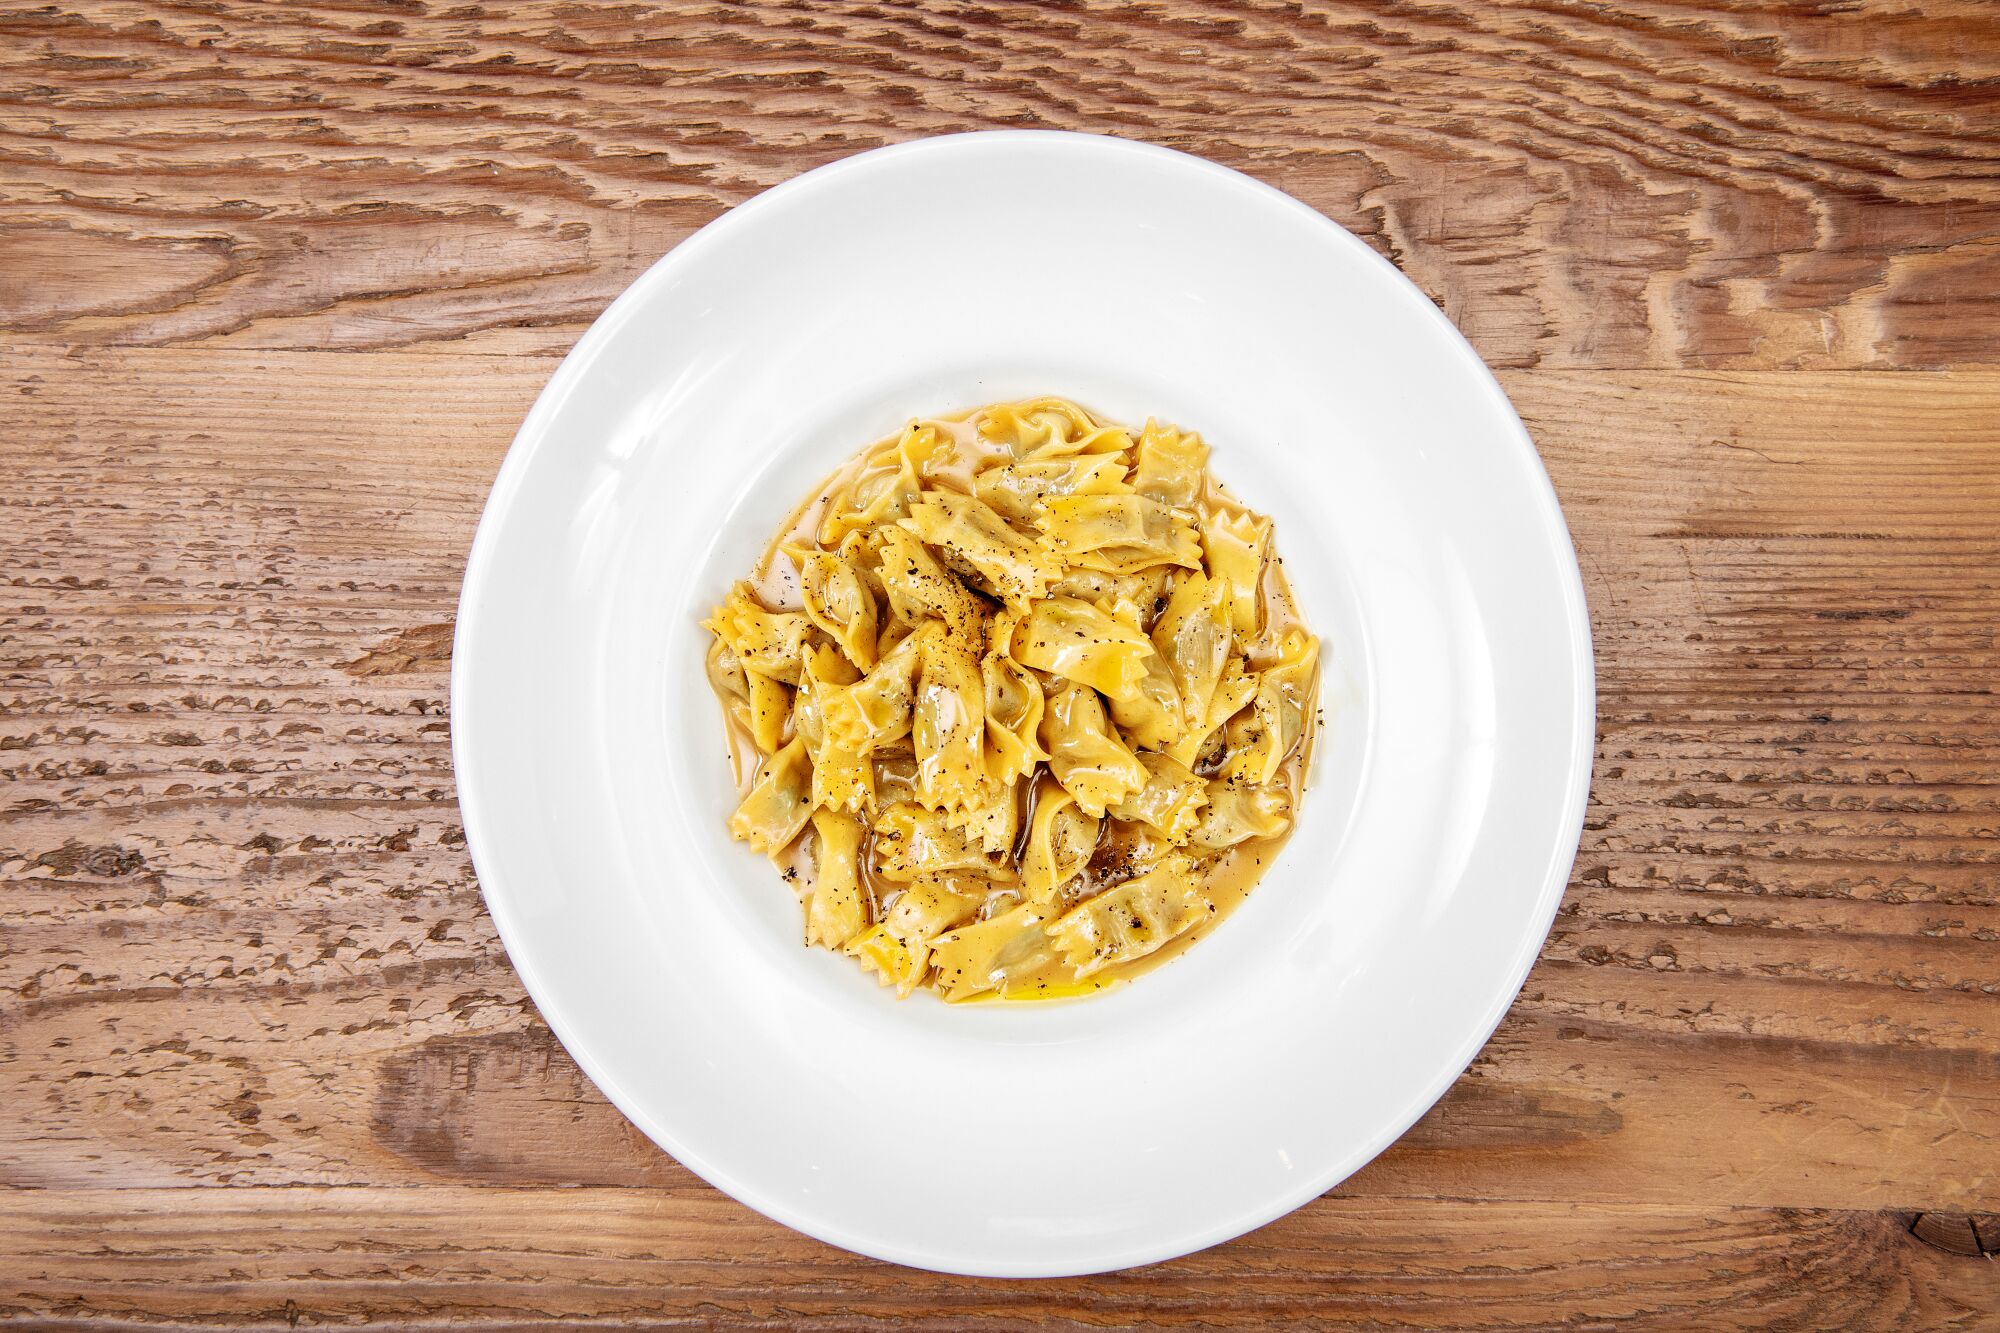 A bowl of pasta from Antico Nuovo